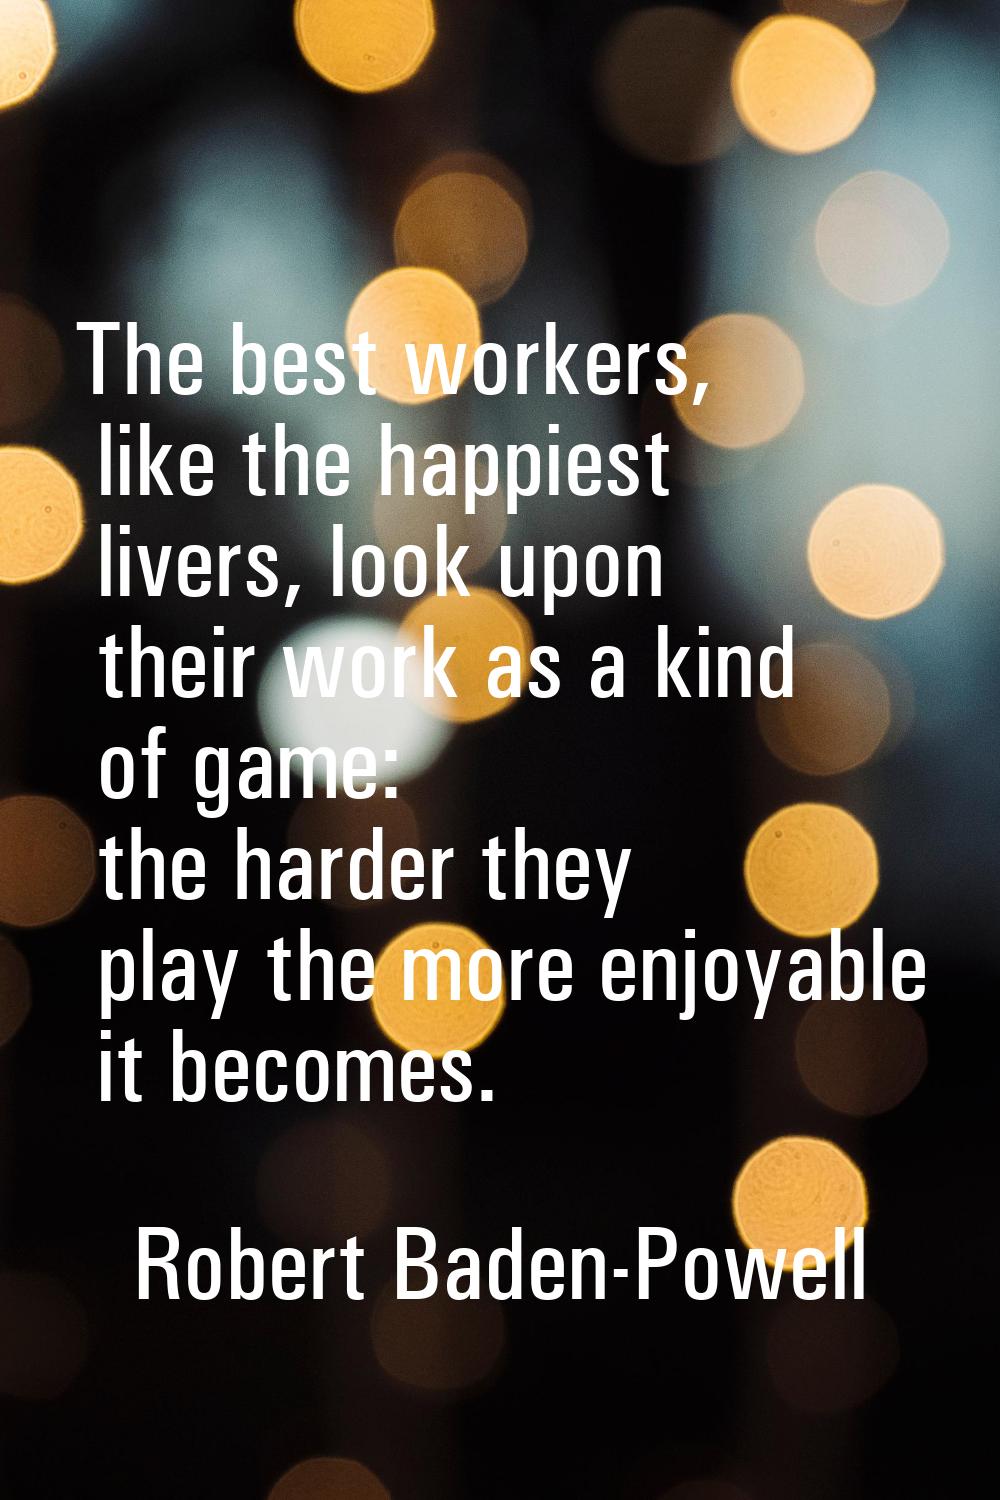 The best workers, like the happiest livers, look upon their work as a kind of game: the harder they